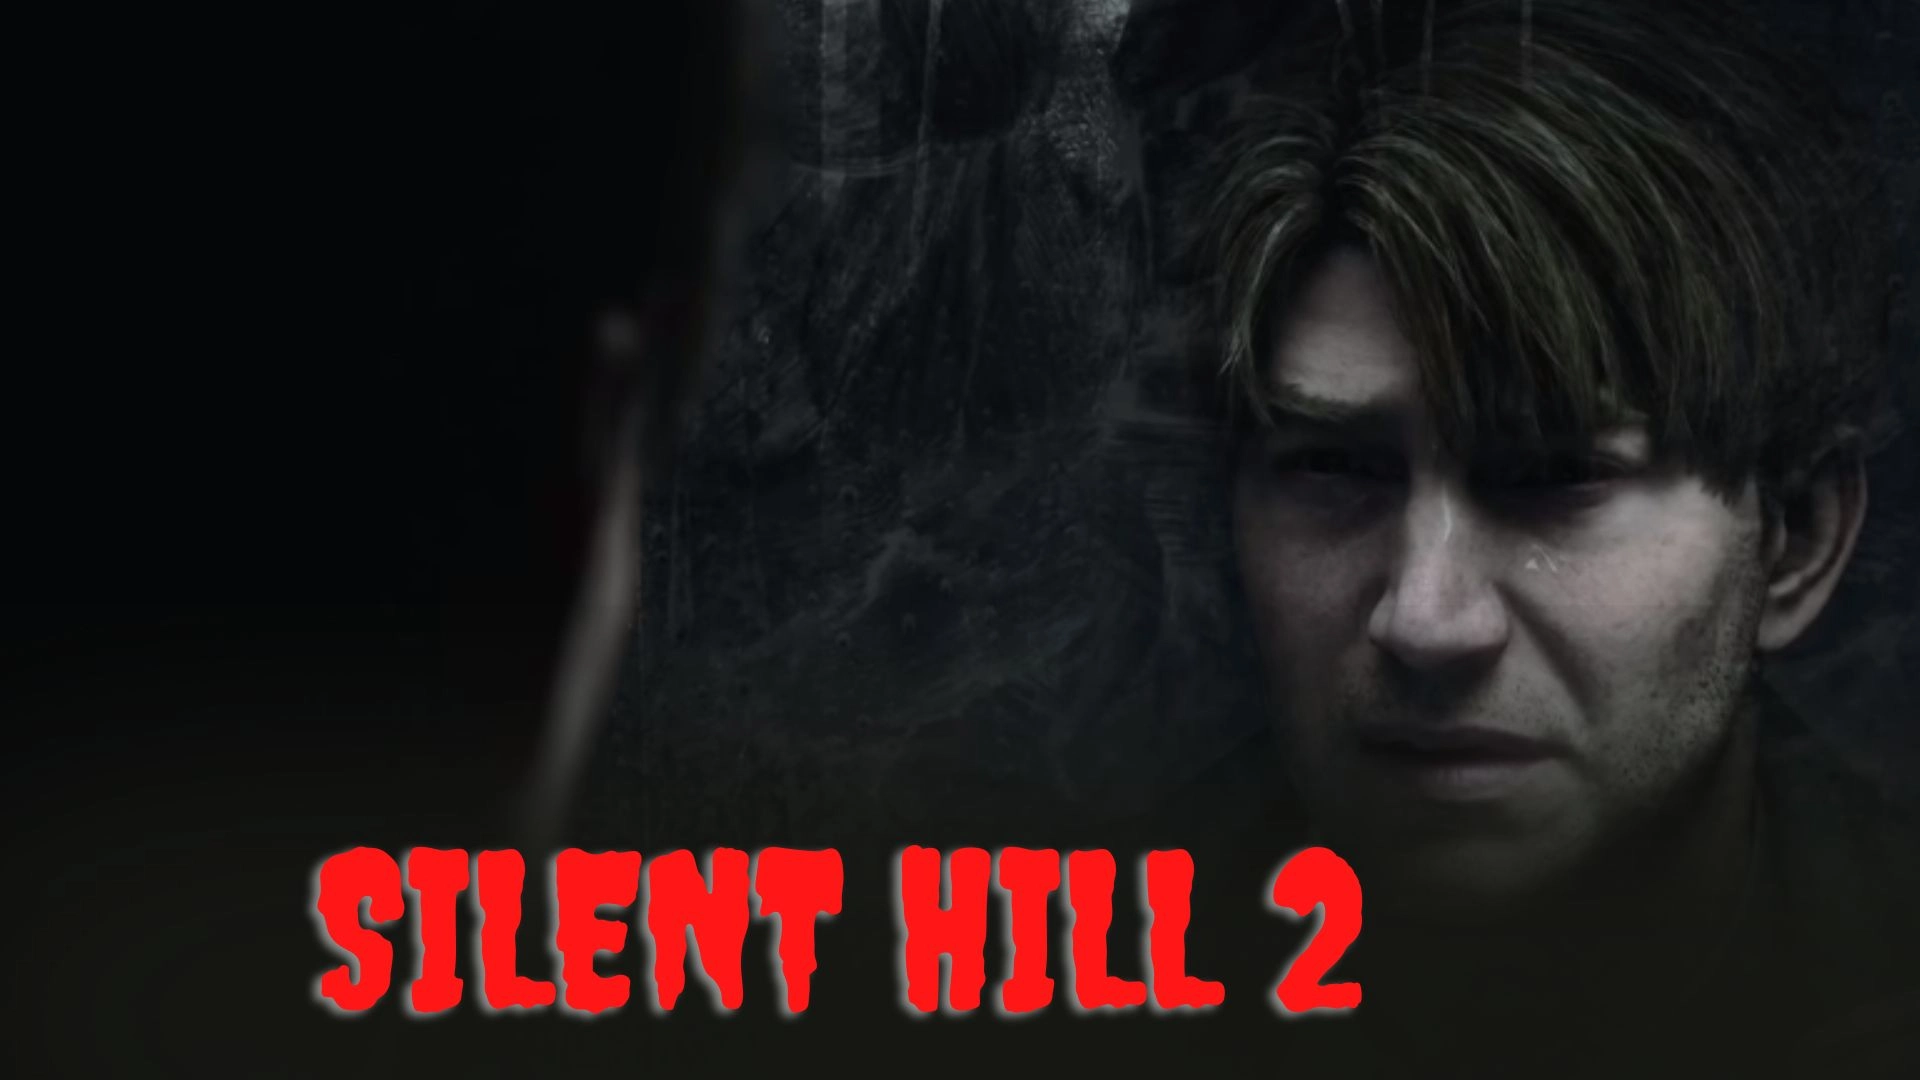 SILENT HILL 2 Parents Guide and Age Rating (2022)